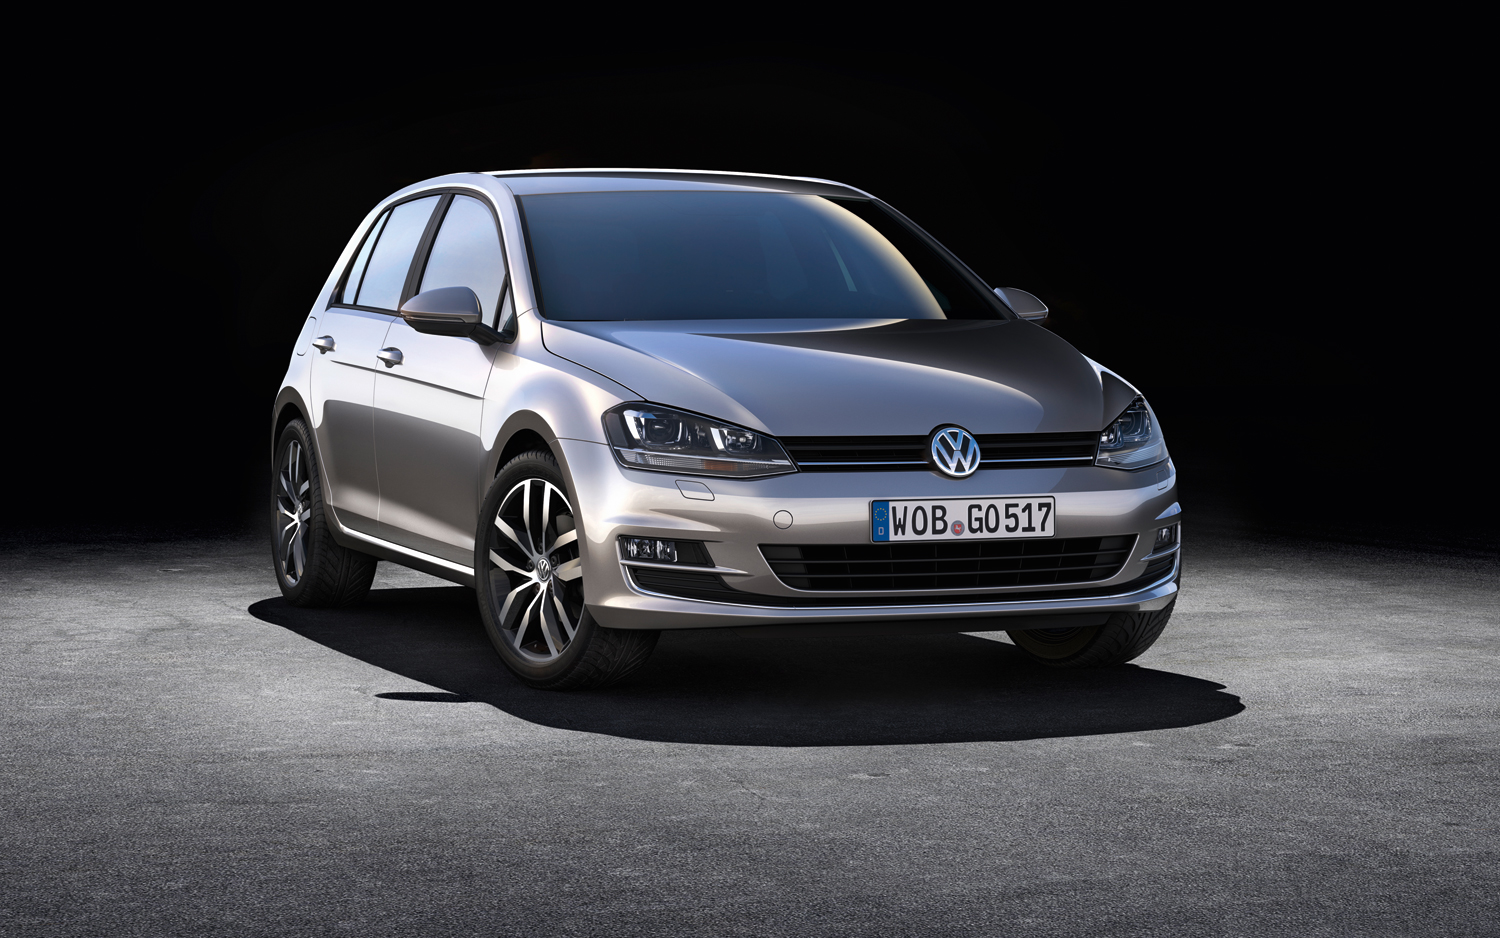  Volkswagen Golf Hd wallpapers New cars reviews